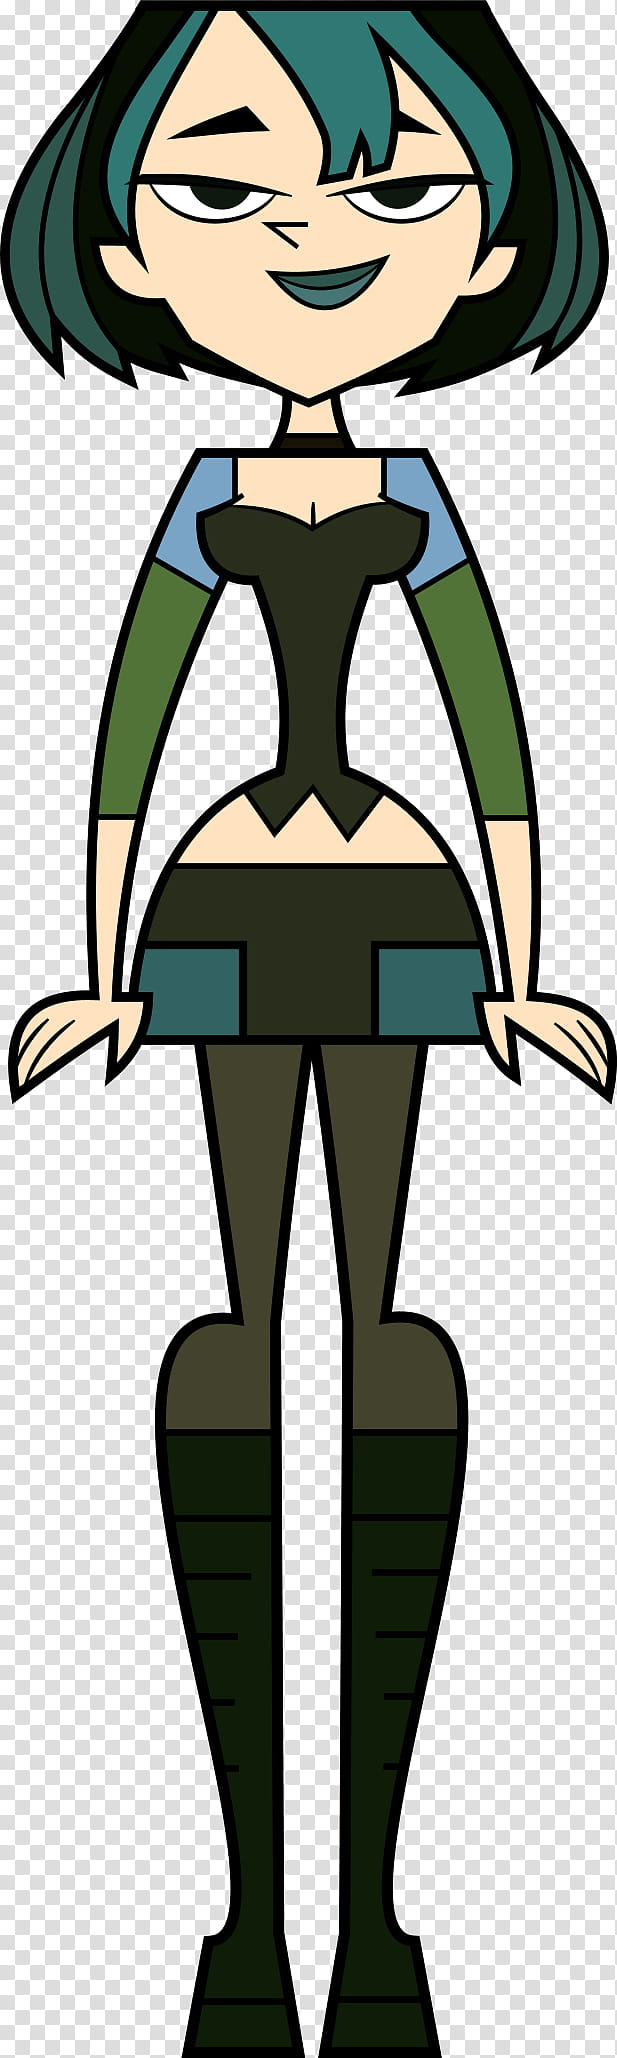 Total Drama Gwen Front View, green haired woman cartoon character art transparent background PNG clipart